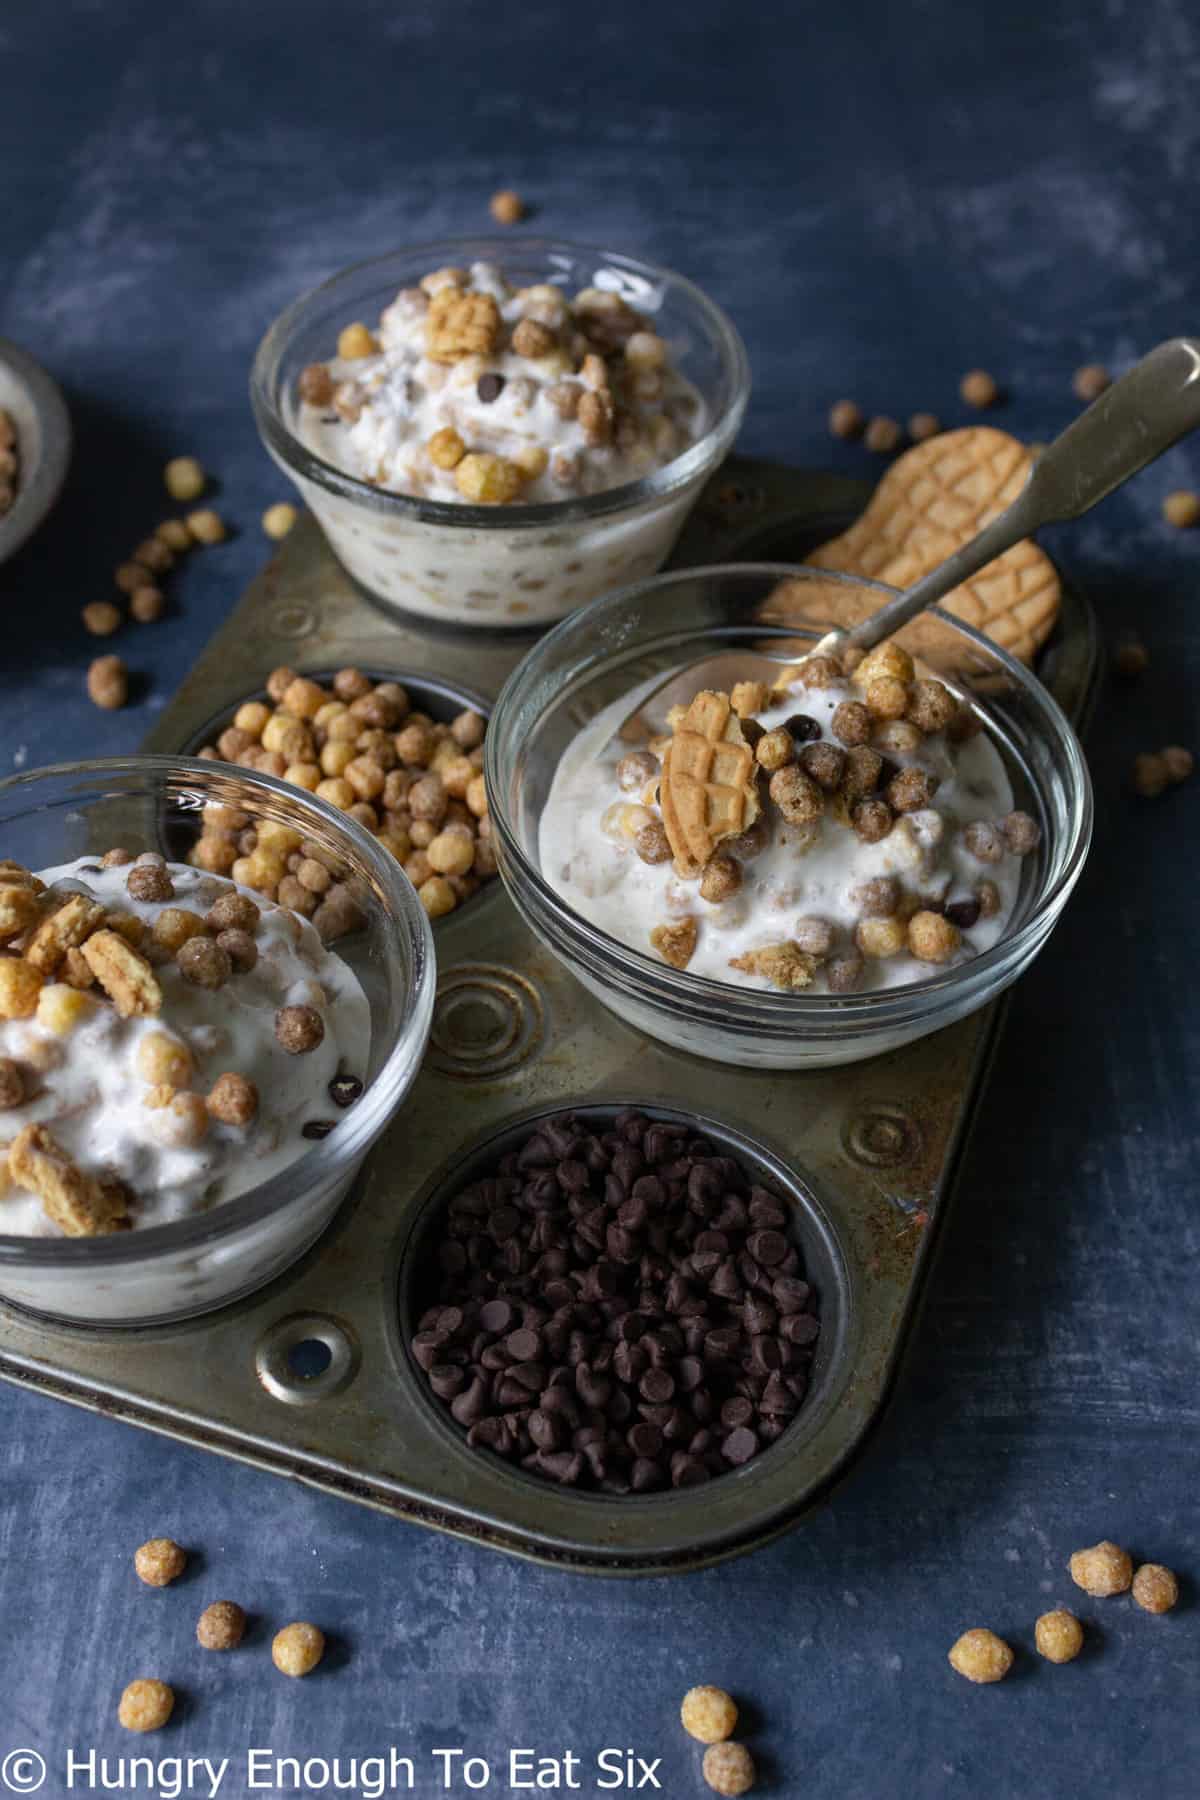 Pan holding chocolate chips, cereal, and dishes of ice cream.